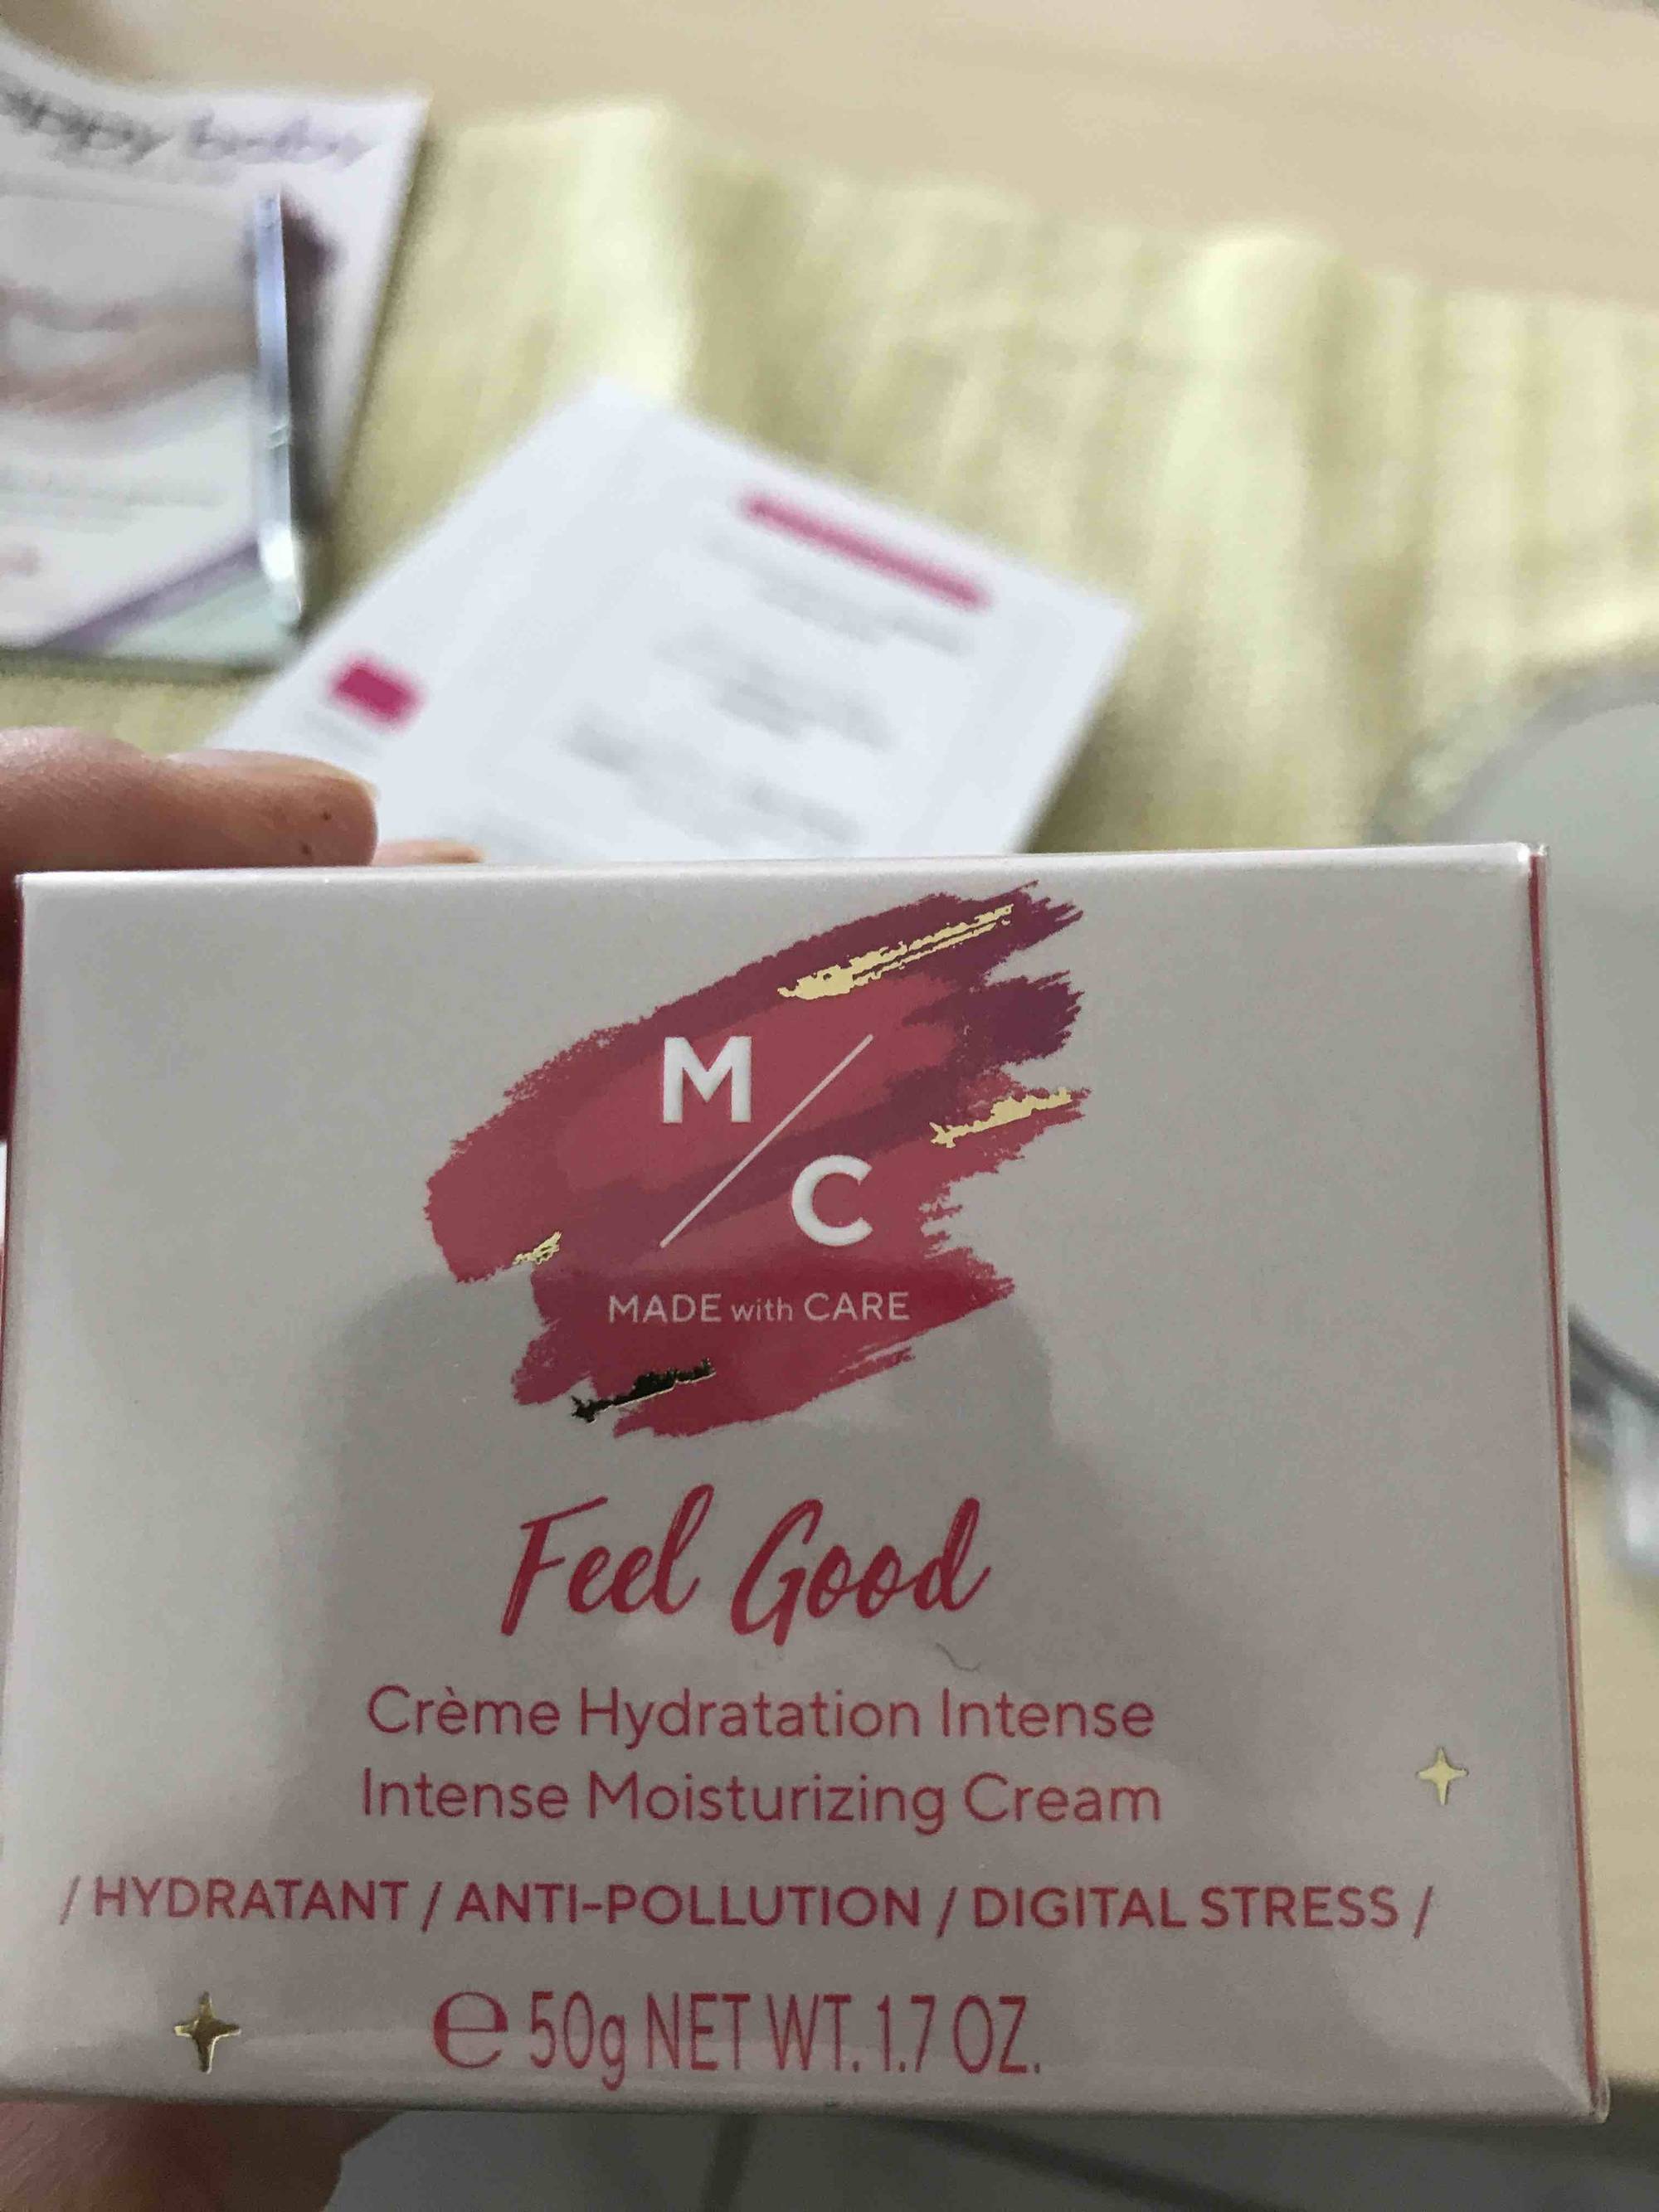 MC MADE WITH CARE - Feel good - Crème hydratation intense